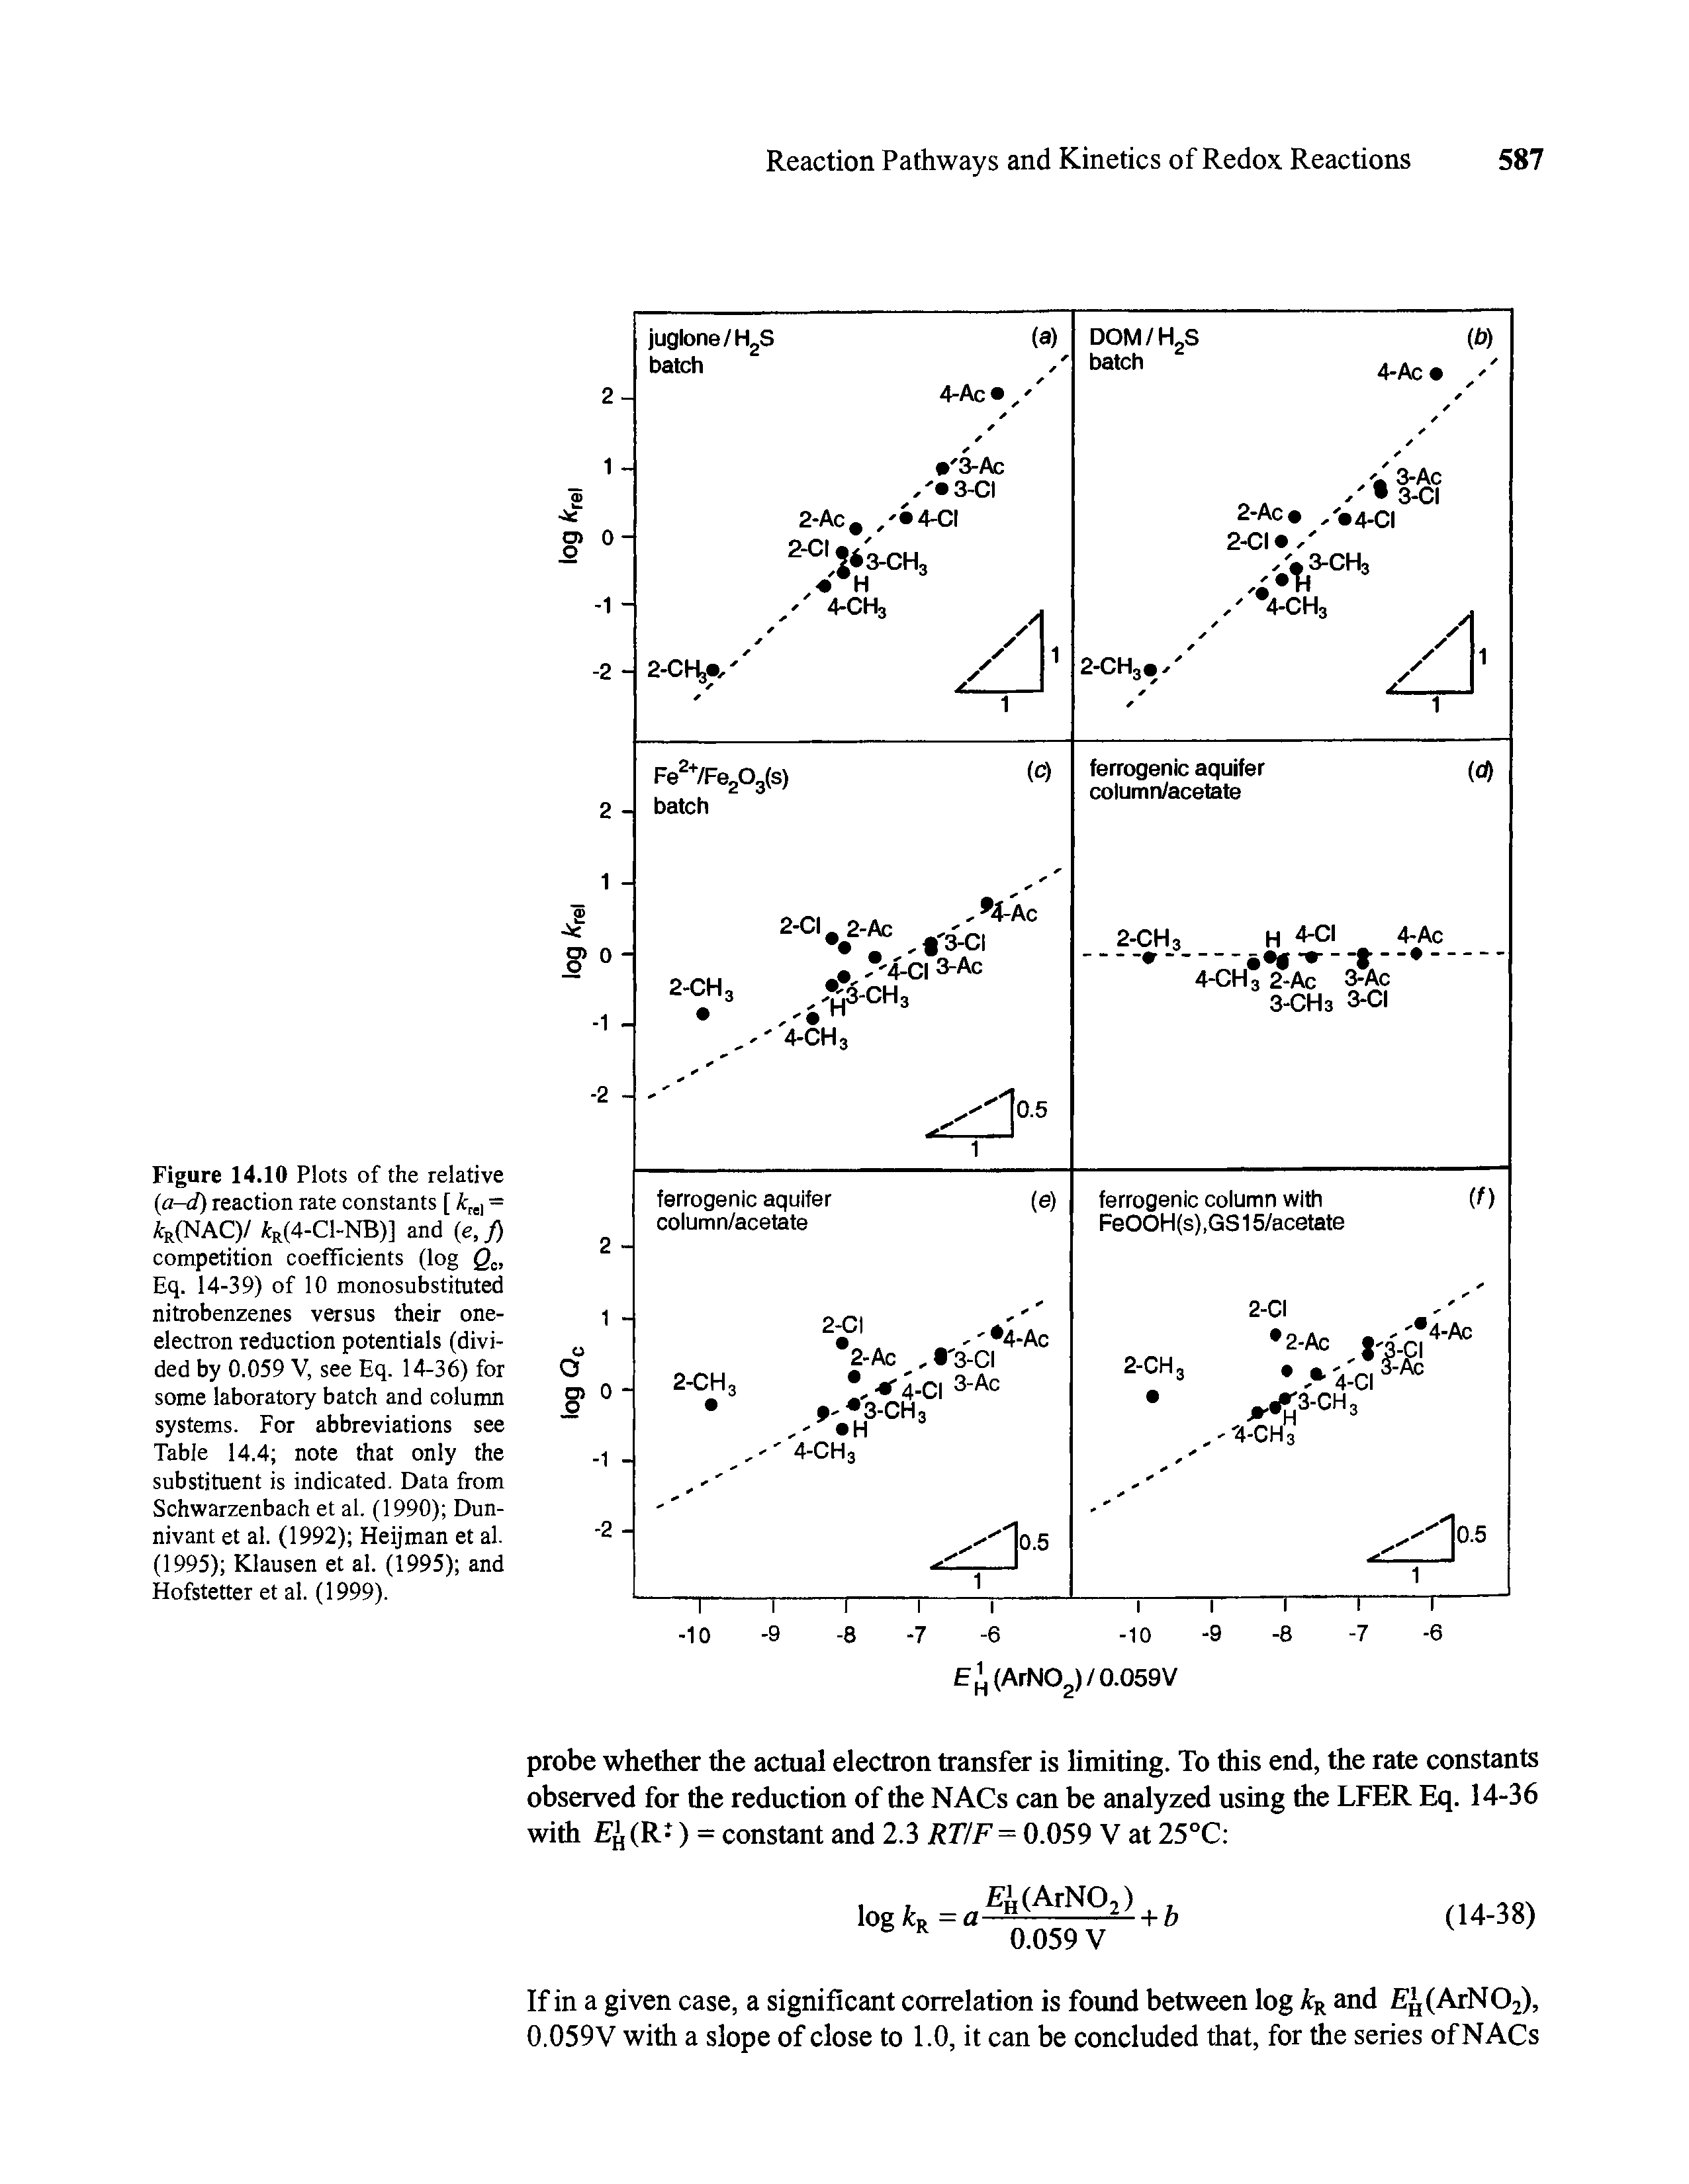 Figure 14.10 Plots of the relative (a-d) reaction rate constants [ krcl = itR(NAC)/ r(4-C1-NB)] and (e, f) competition coefficients (log Qc, Eq. 14-39) of 10 monosubstituted nitrobenzenes versus their one-electron reduction potentials (divided by 0.059 V, see Eq. 14-36) for some laboratory batch and column systems. For abbreviations see Table 14.4 note that only the substituent is indicated. Data from Schwarzenbach et al. (1990) Dun-nivant et al. (1992) Heijman et al. (1995) Klausen et al. (1995) and Hofstetter et al. (1999).